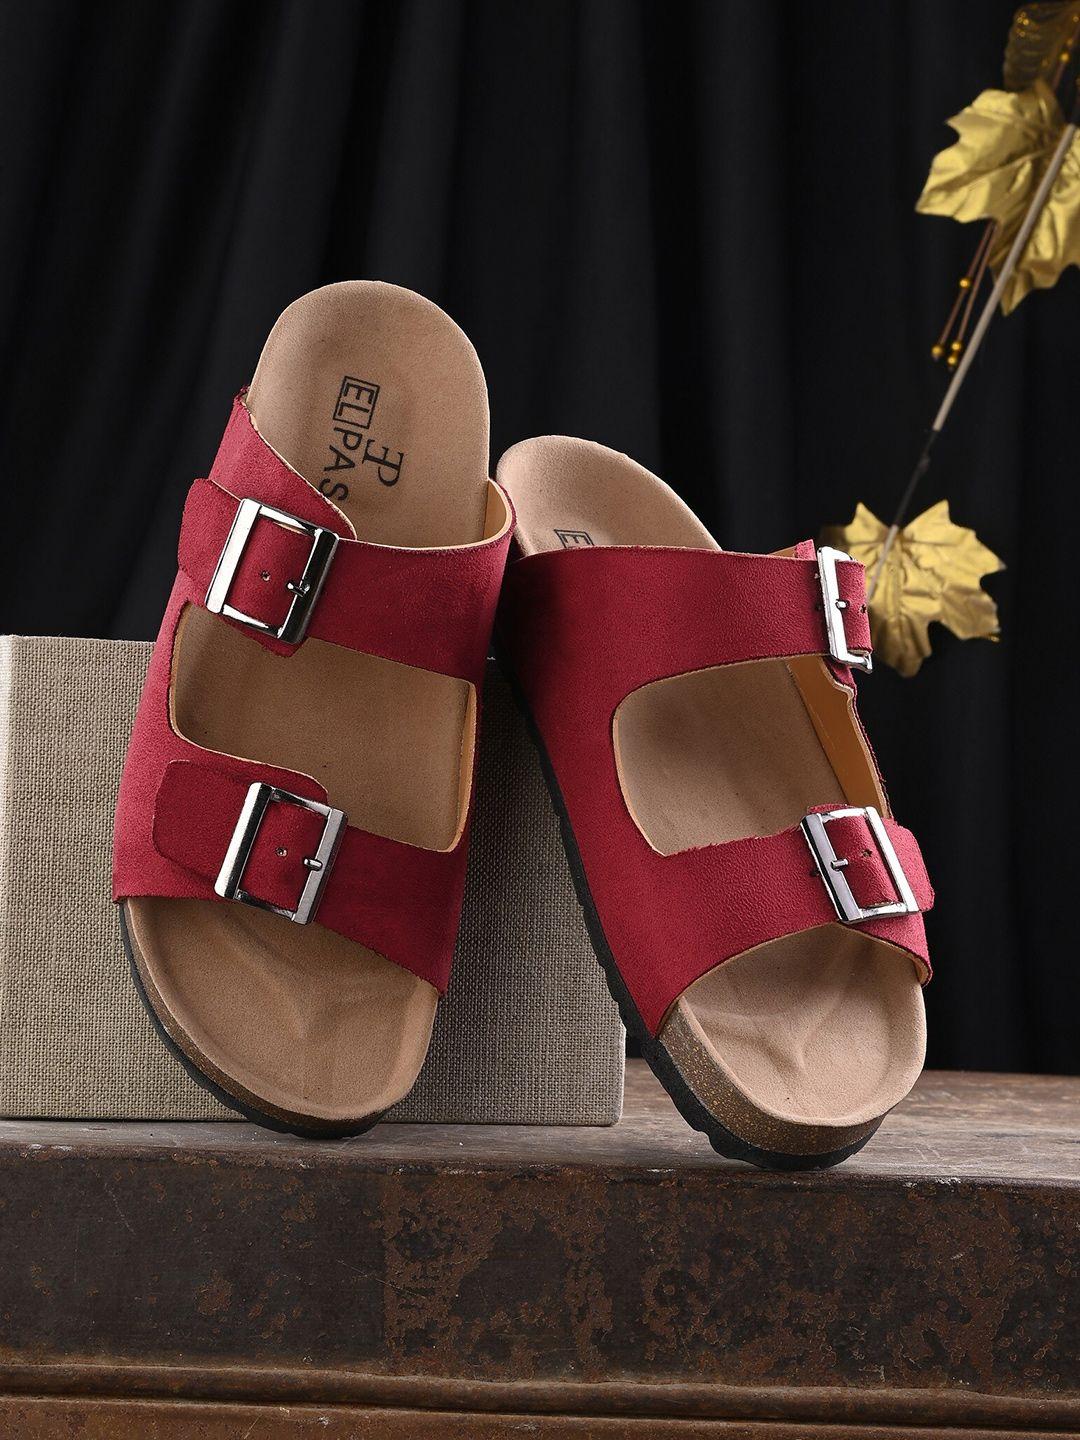 el-paso-women-two-straps-open-toe-flats-with-buckle-detail